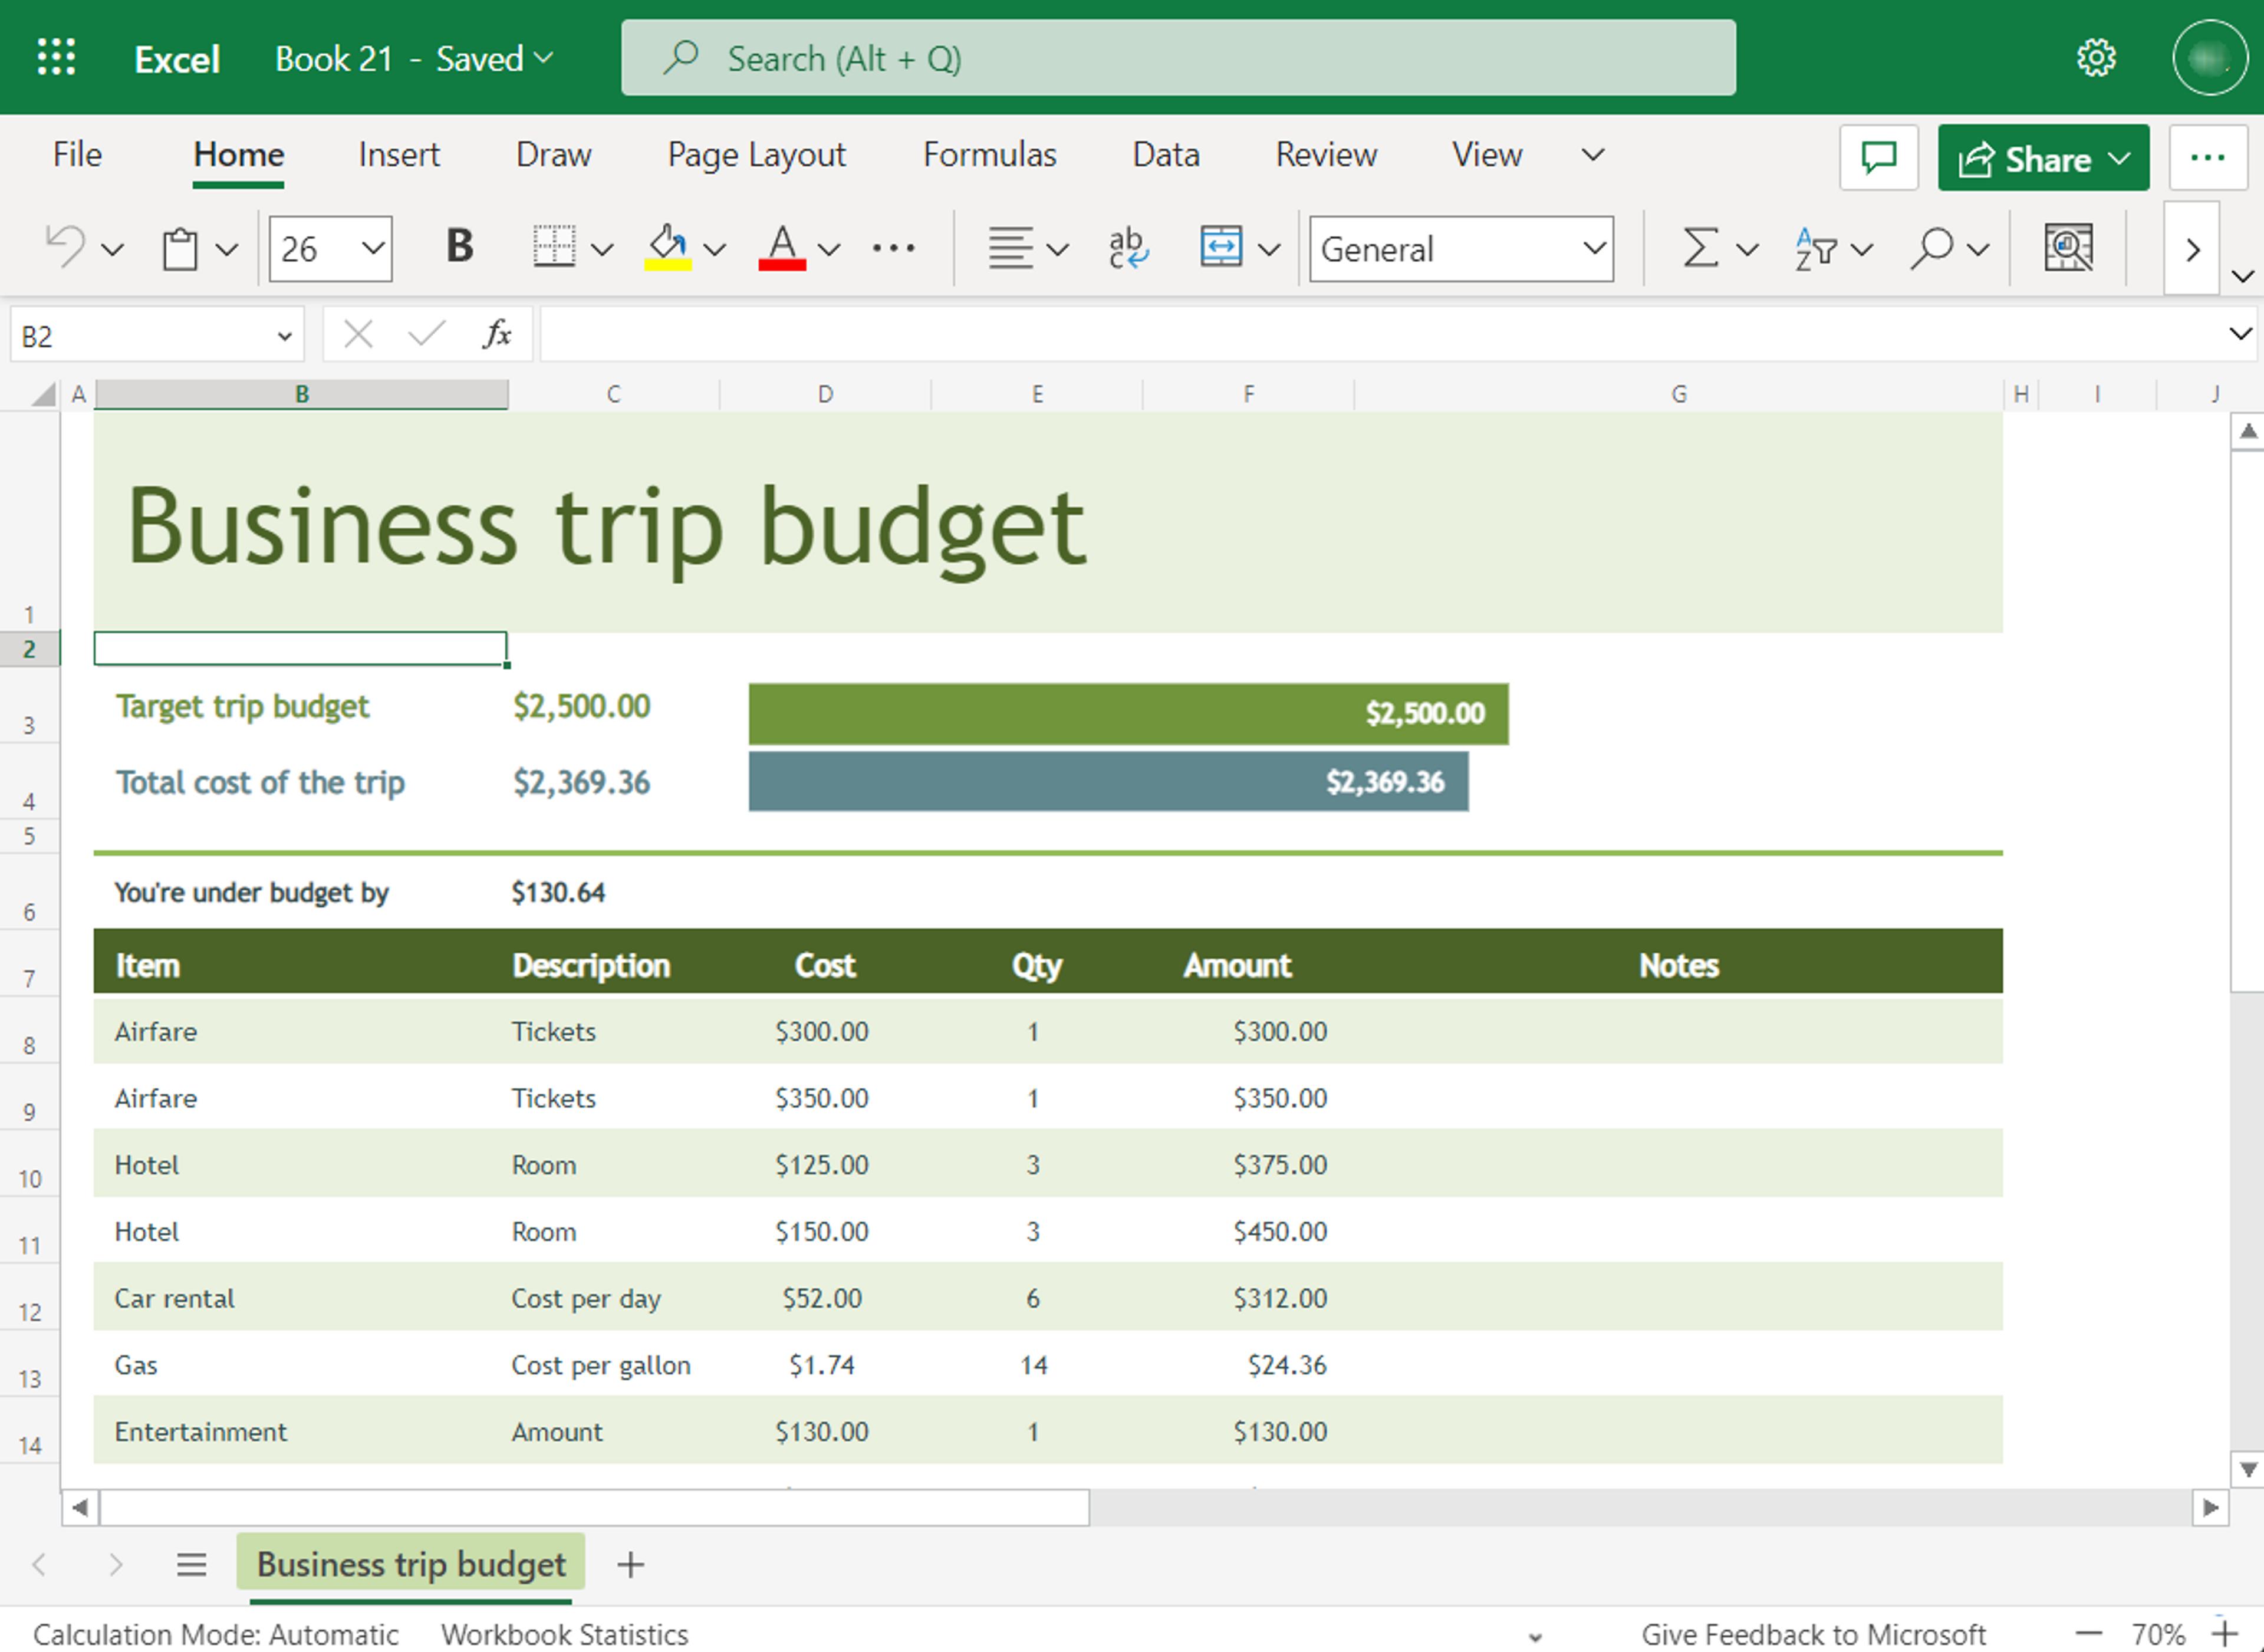 Tracking a company’s business travel budget in MS Excel